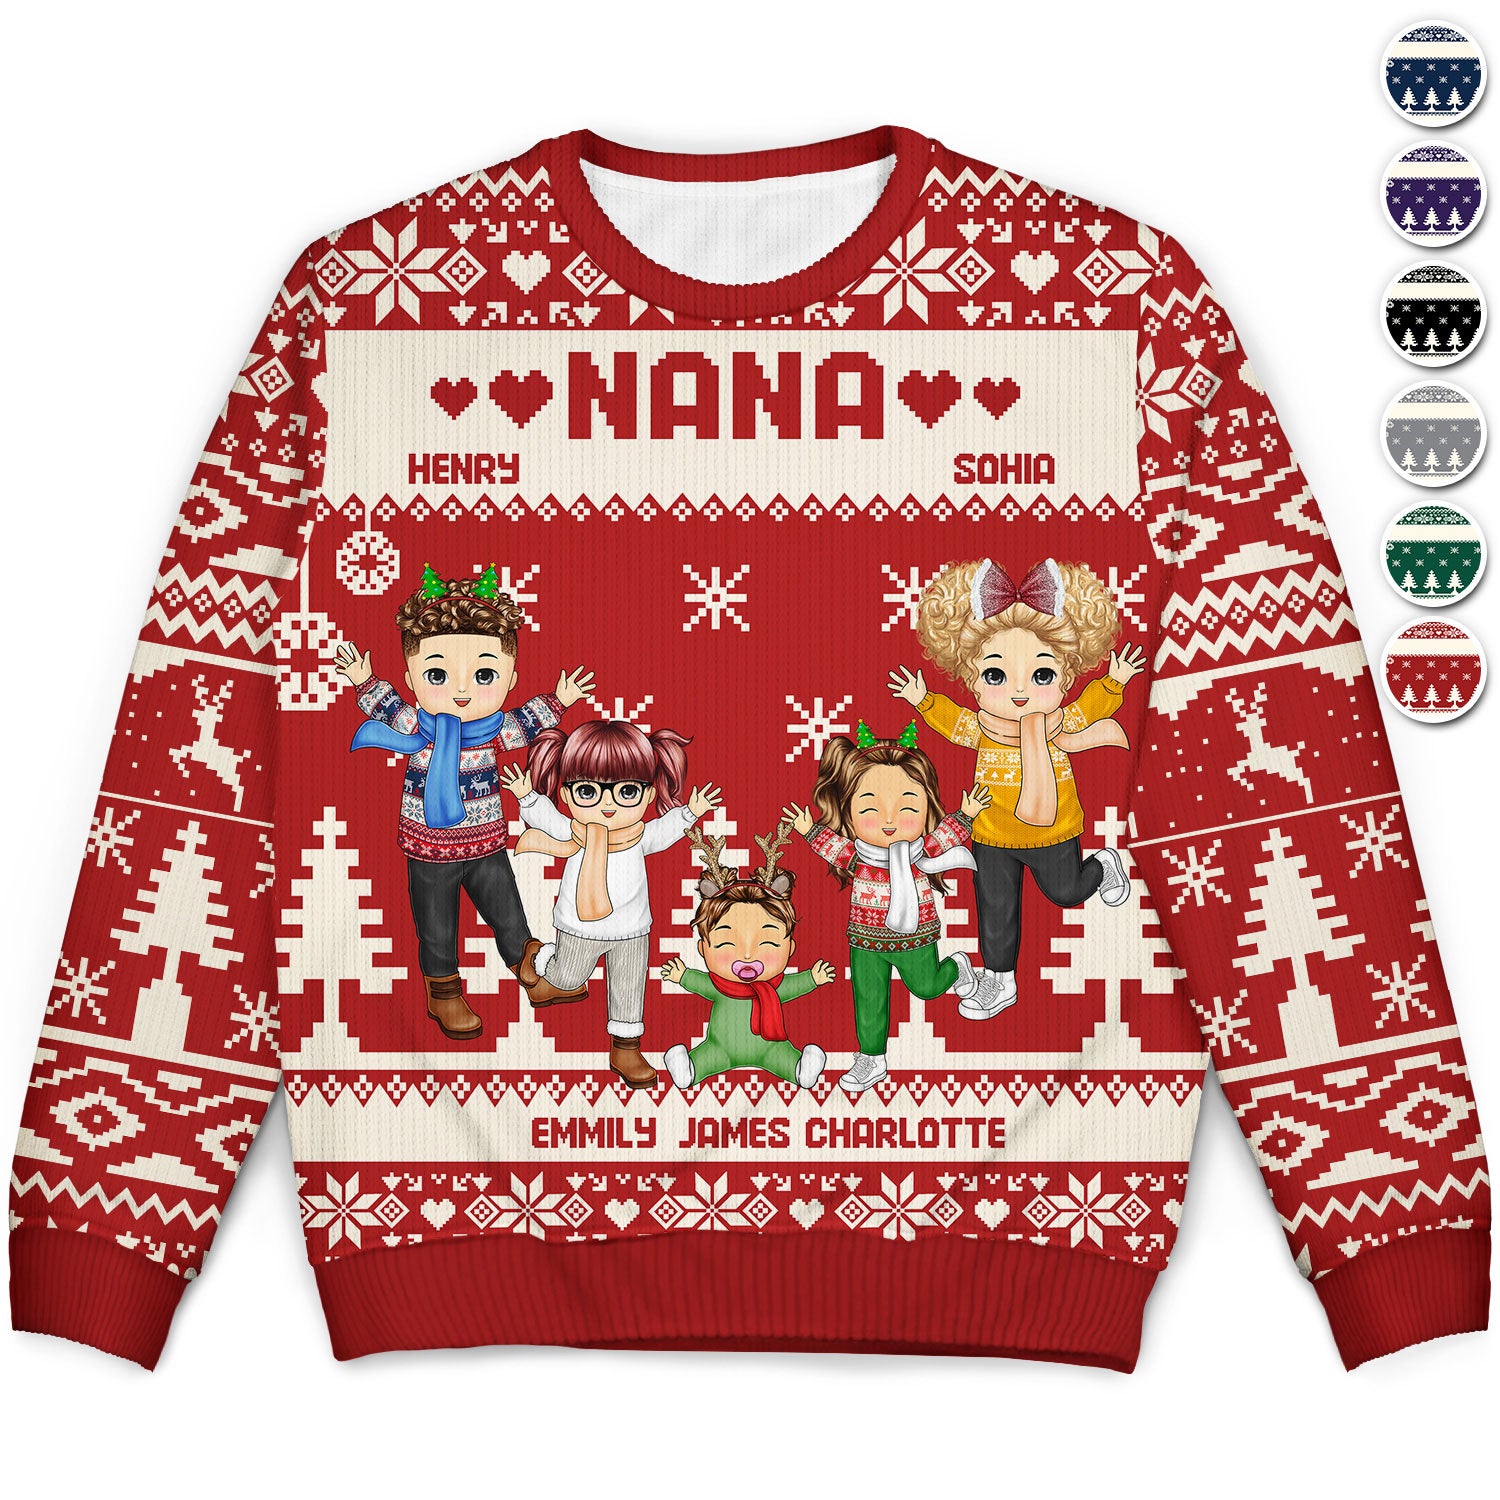 Nana Papa Daddy Mommy Grandkids - Christmas Gift For Grandparents, Parents- Personalized Unisex Ugly Sweater